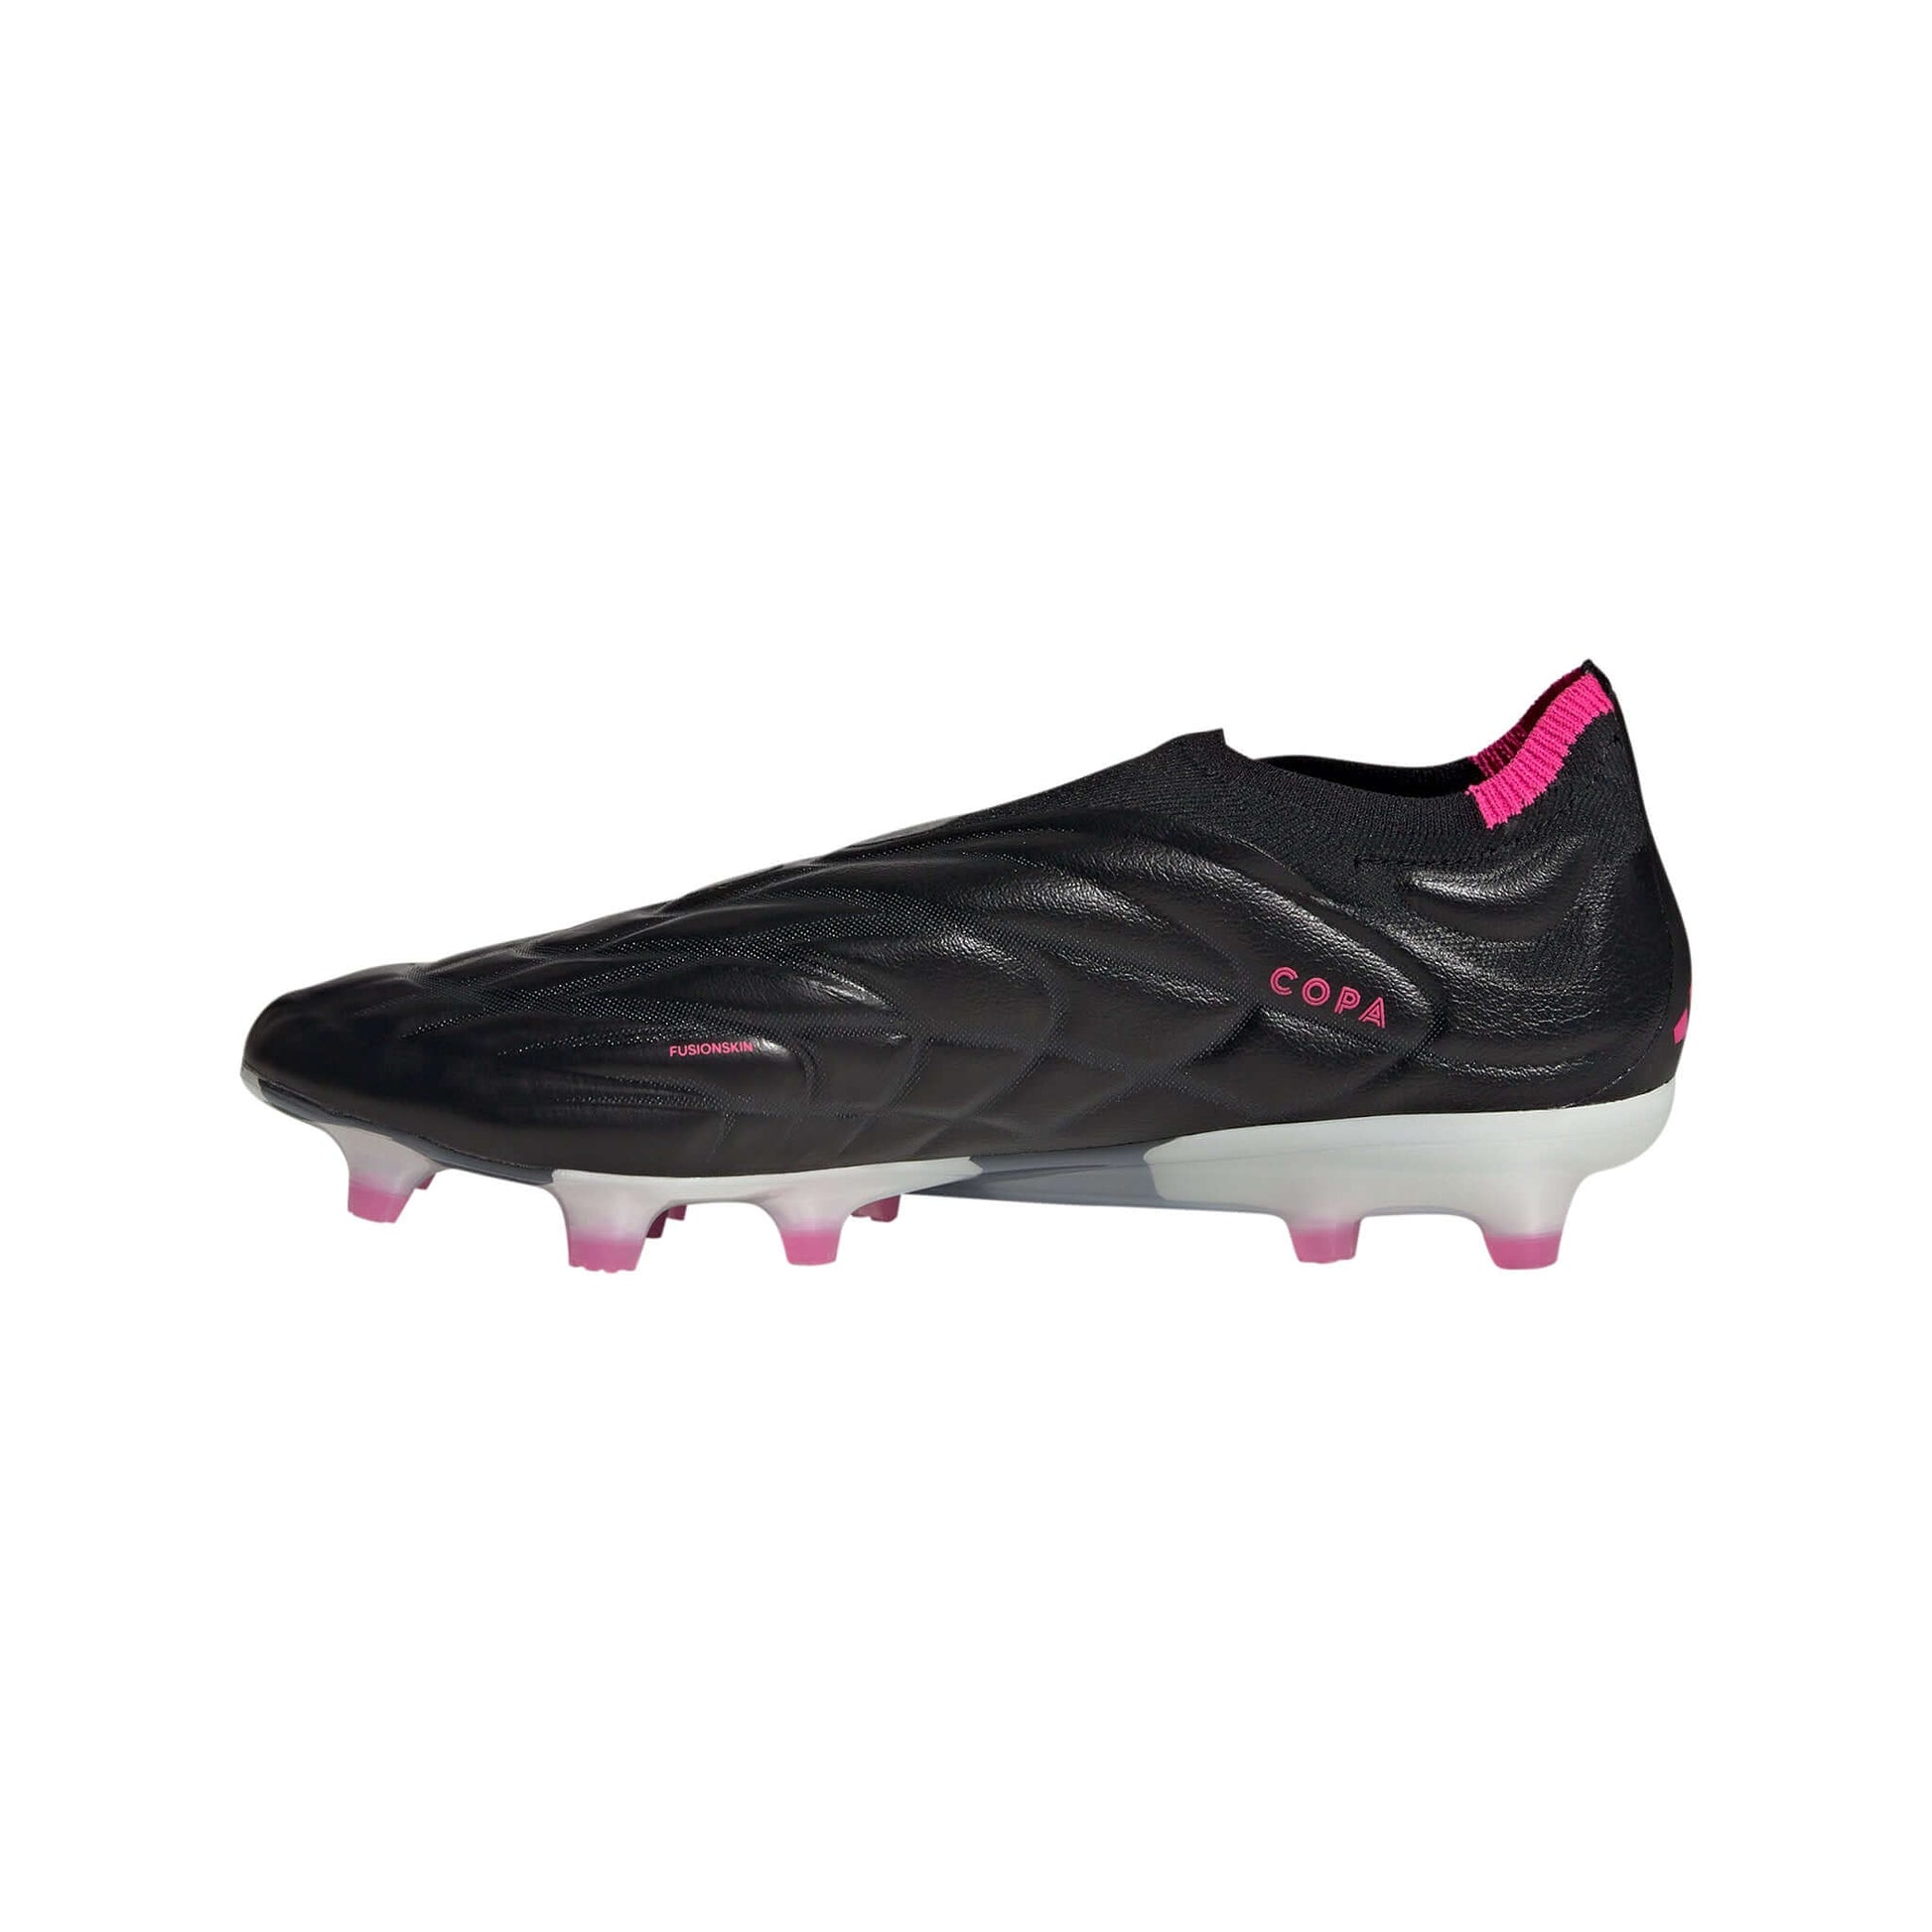 Copa Pure+ Firm Ground Cleats | EvangelistaSports.com | Canada's Premiere Soccer Store